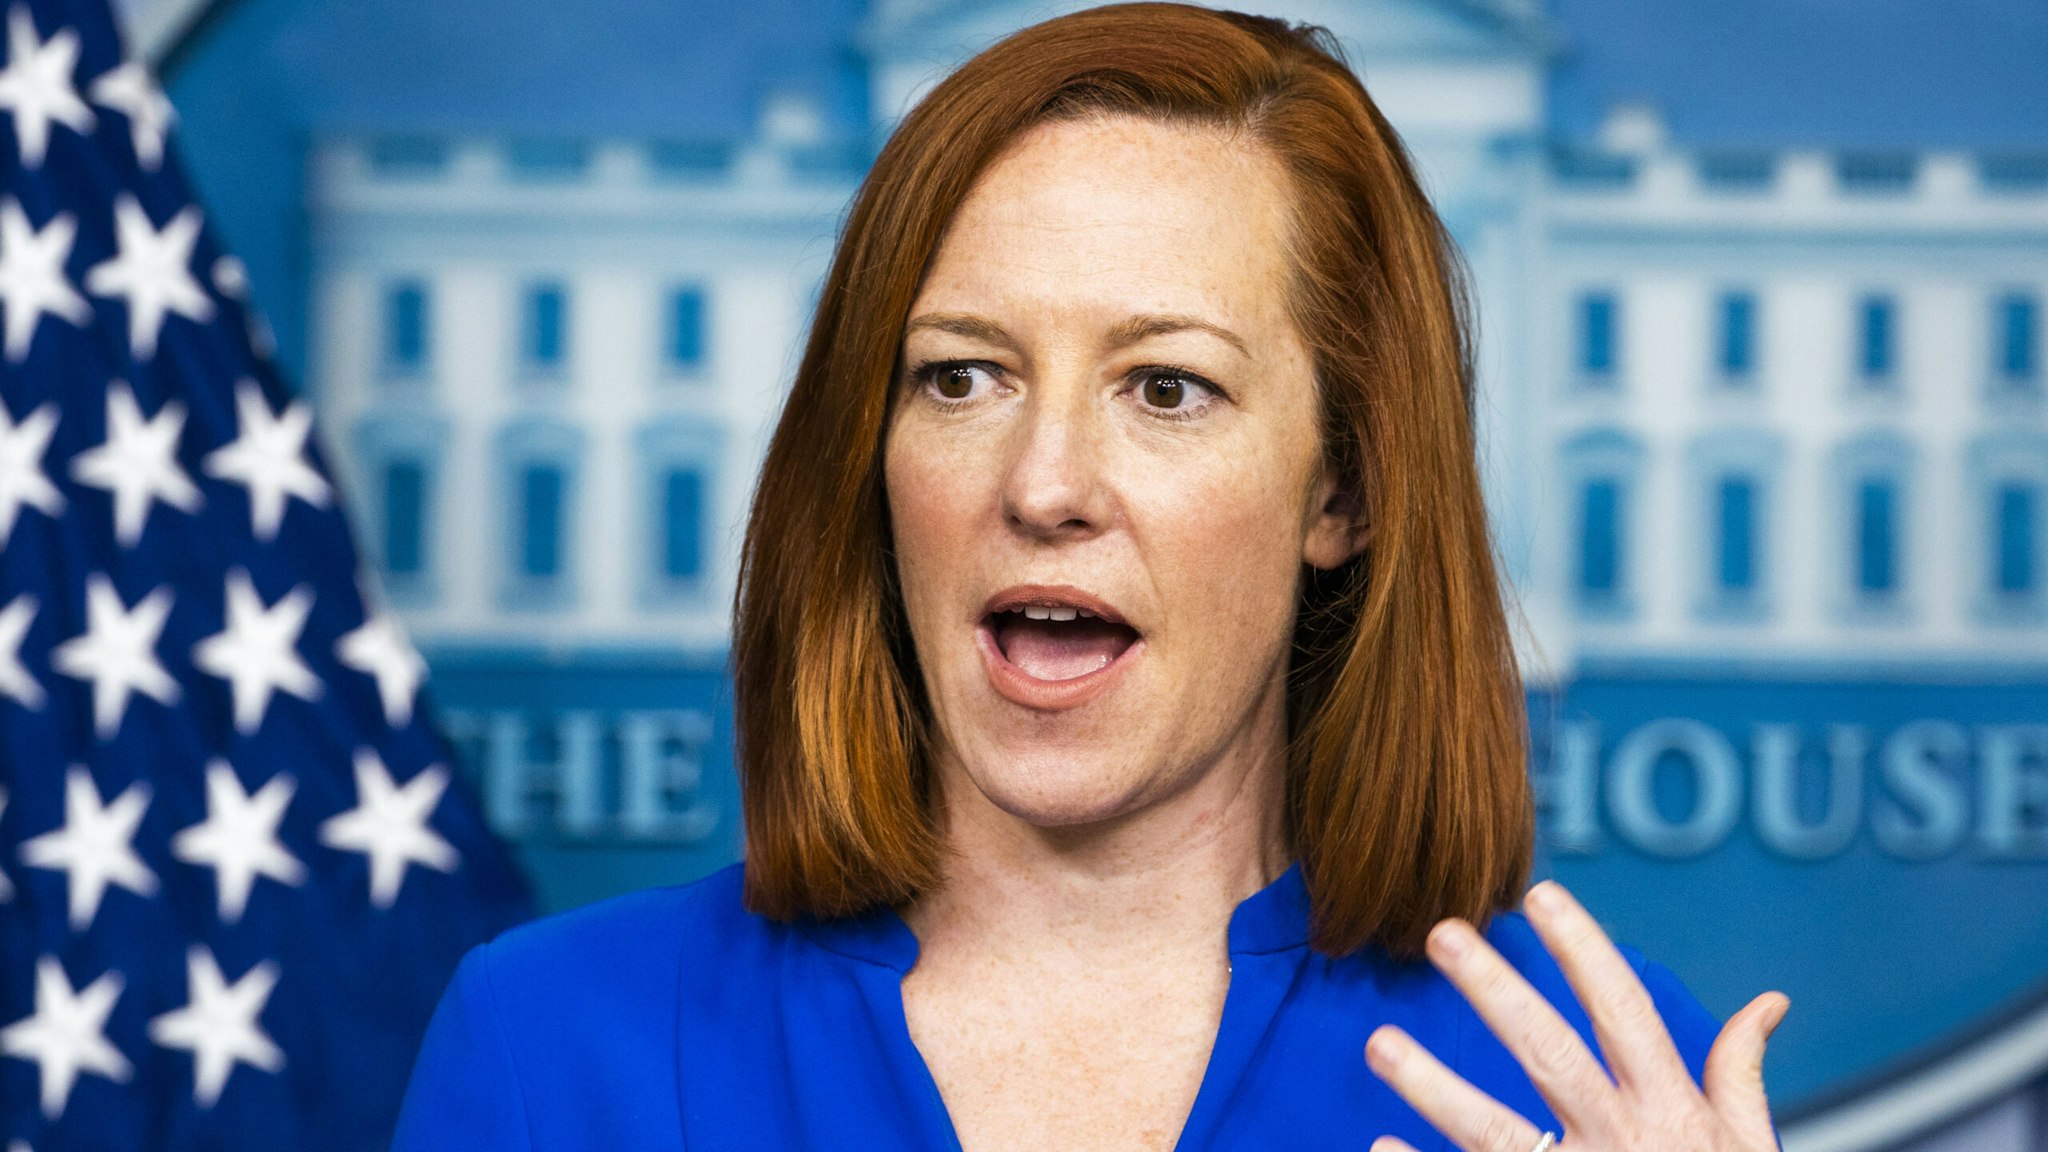 Jen Psaki, White House press secretary, speaks during a news conference in the James S. Brady Press Briefing Room at the White House in Washington, D.C., U.S., on Friday, March 12, 2021. President Biden offered Americans a glimpse of hope that life would begin to return to normal this summer as he marked a year of U.S. shutdowns and death, ordering a further acceleration of the governments efforts to end the pandemic.